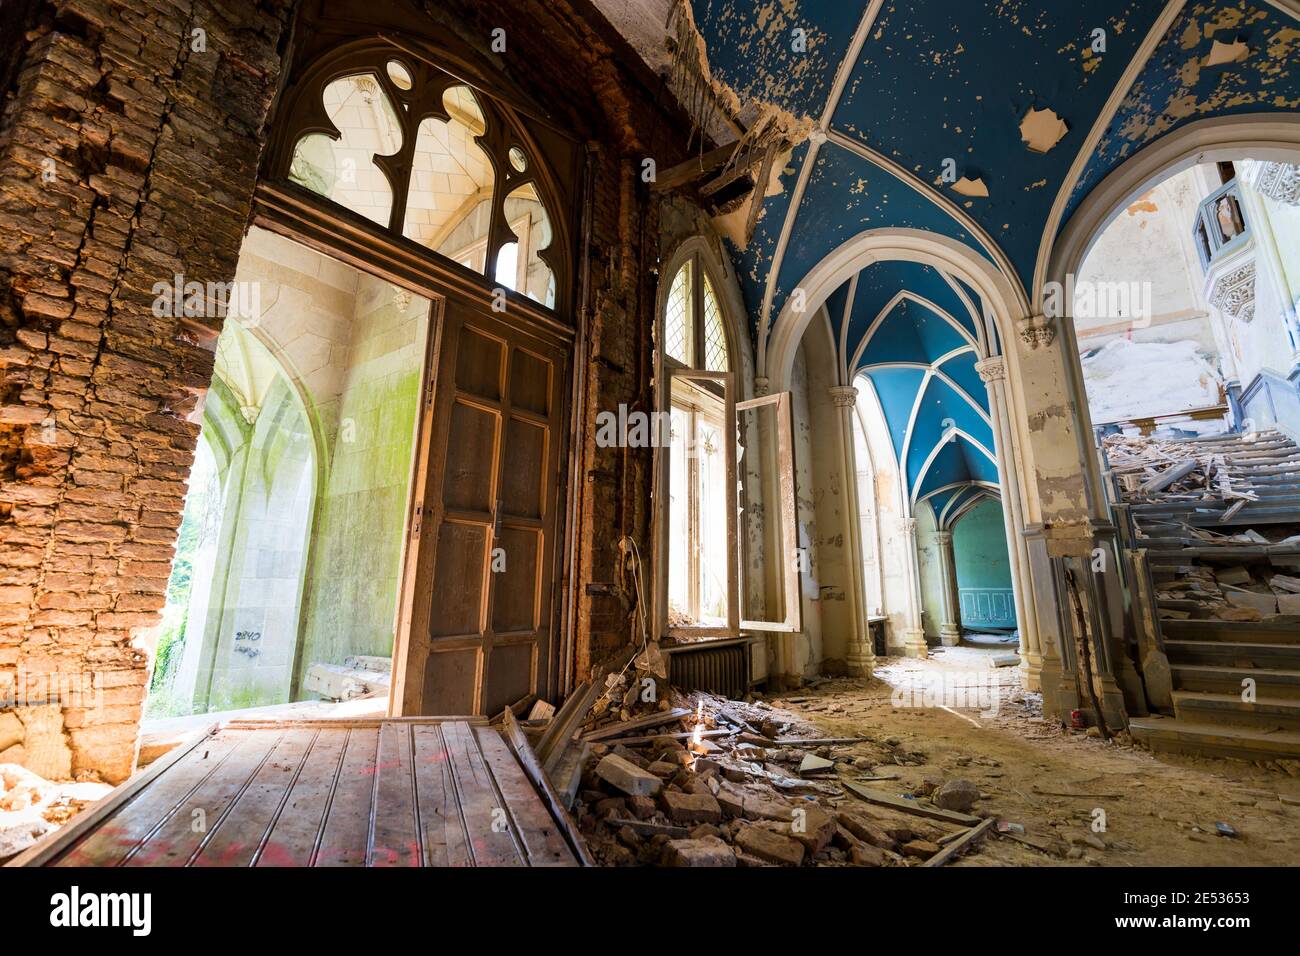 Wide angle shot of the interior of an old and abandoned baroque castle, with pointed arches and blue cross vaults Stock Photo